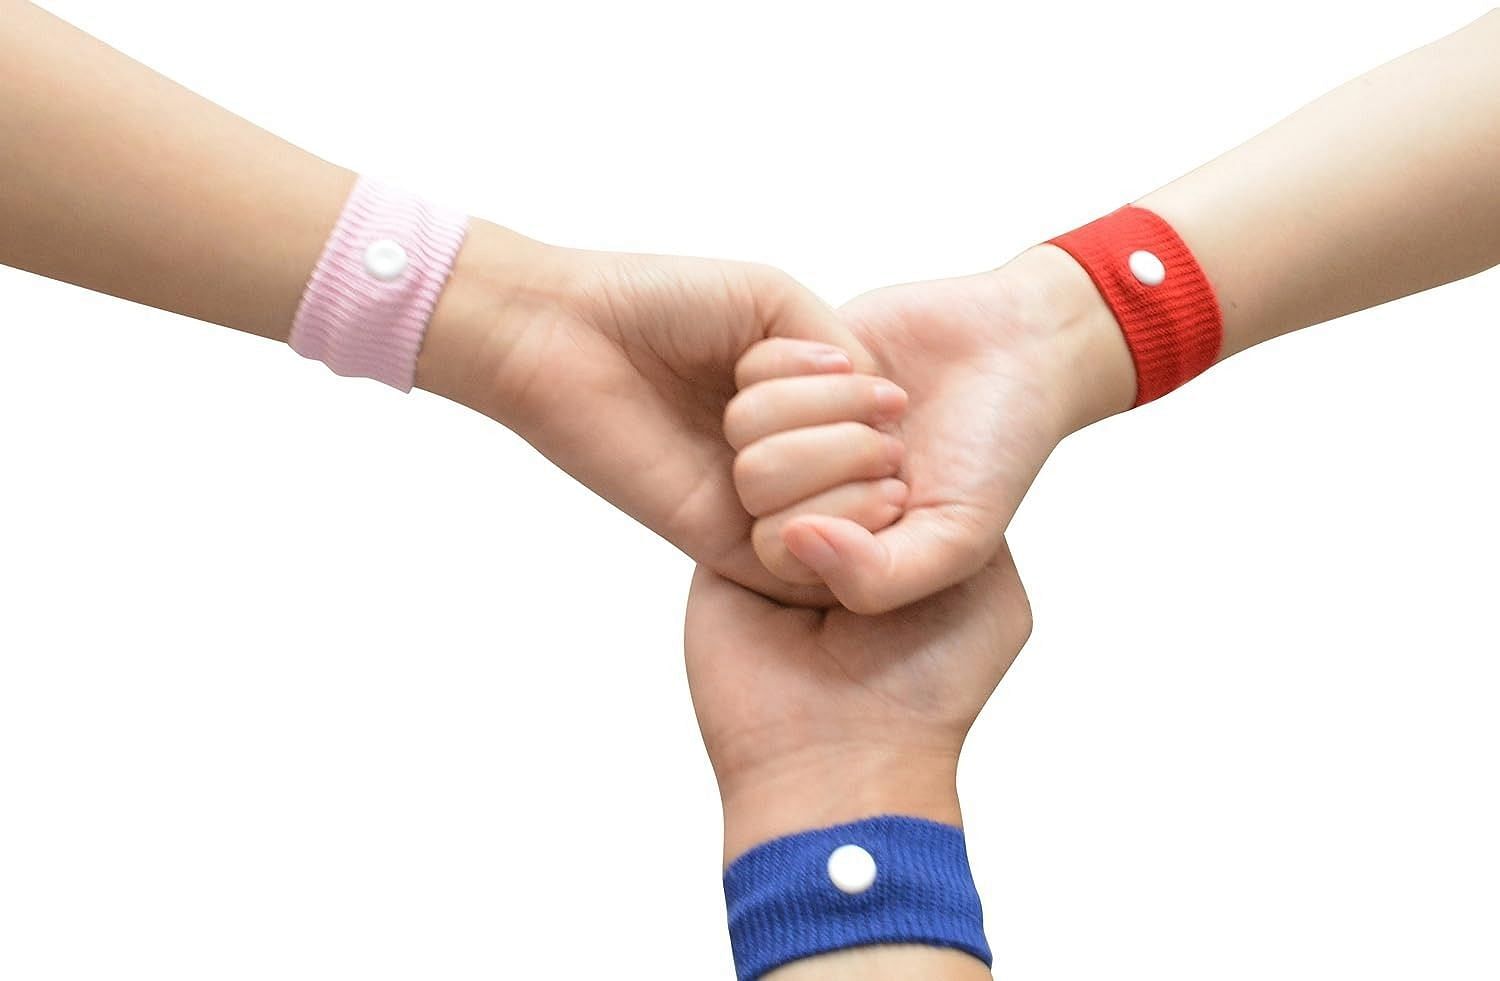 Acupressure wristbands (Image via Getty Images)